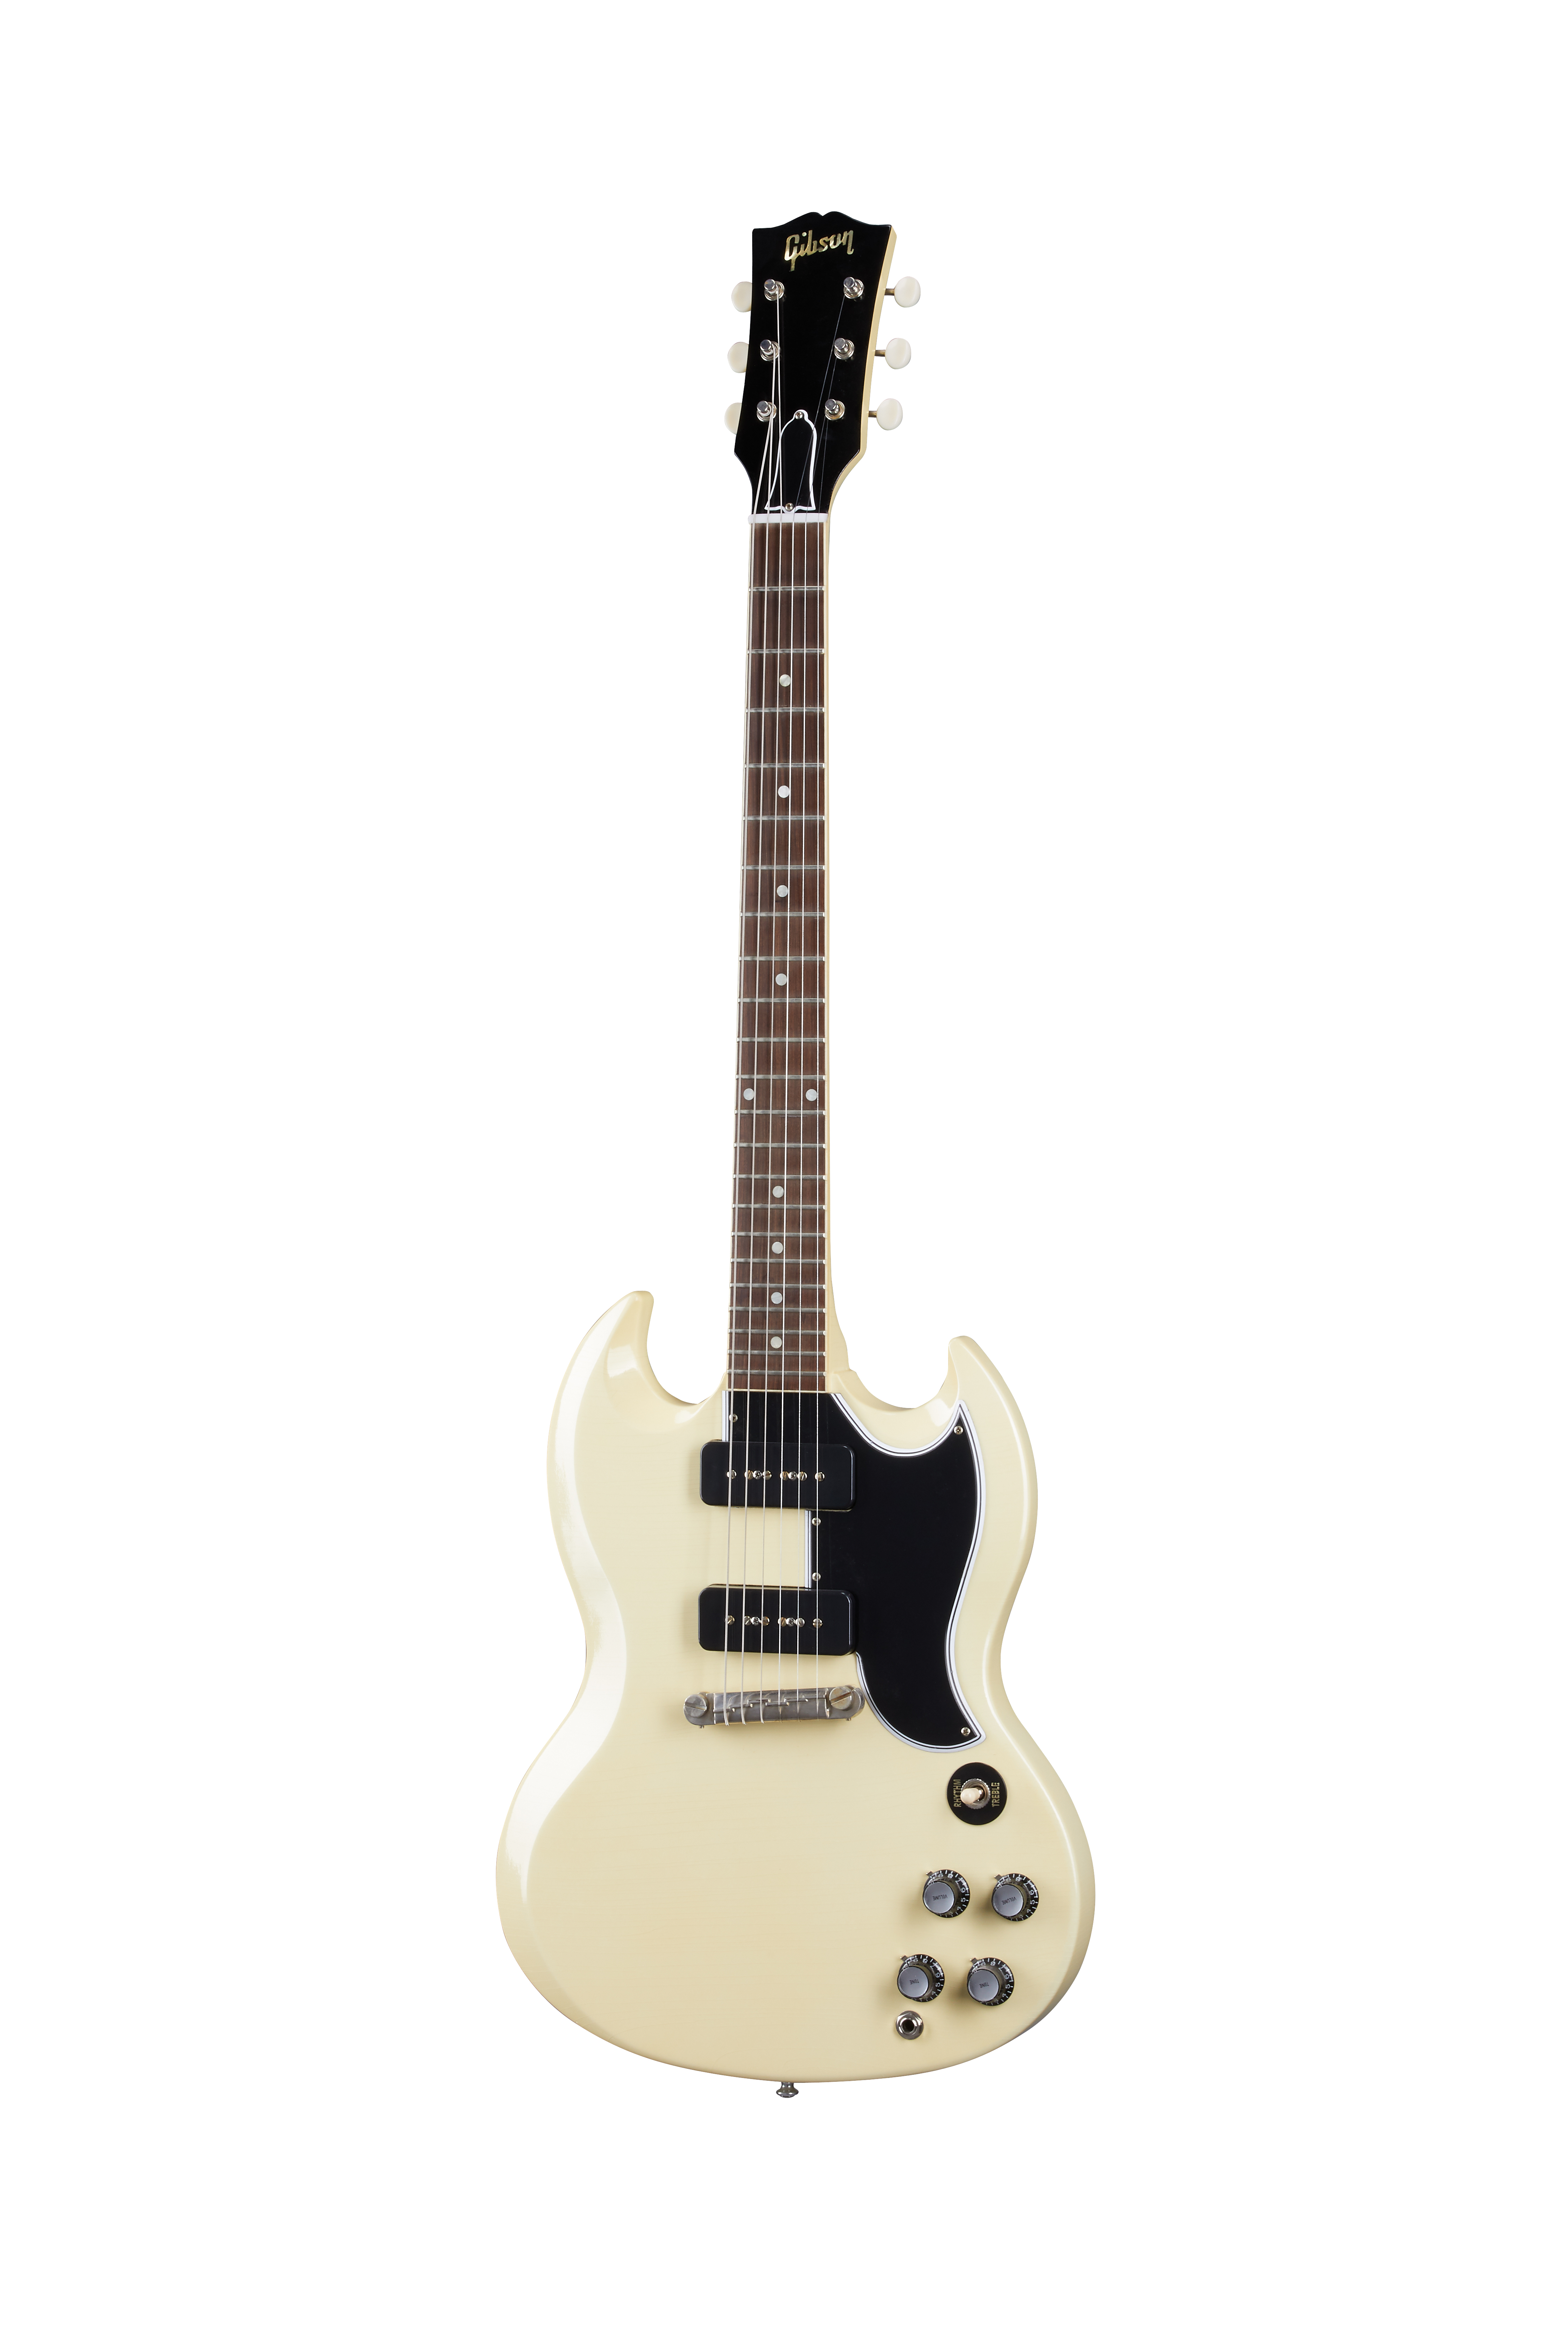 Gibson | 1963 SG Special Classic White Ultra Light Aged Classic White